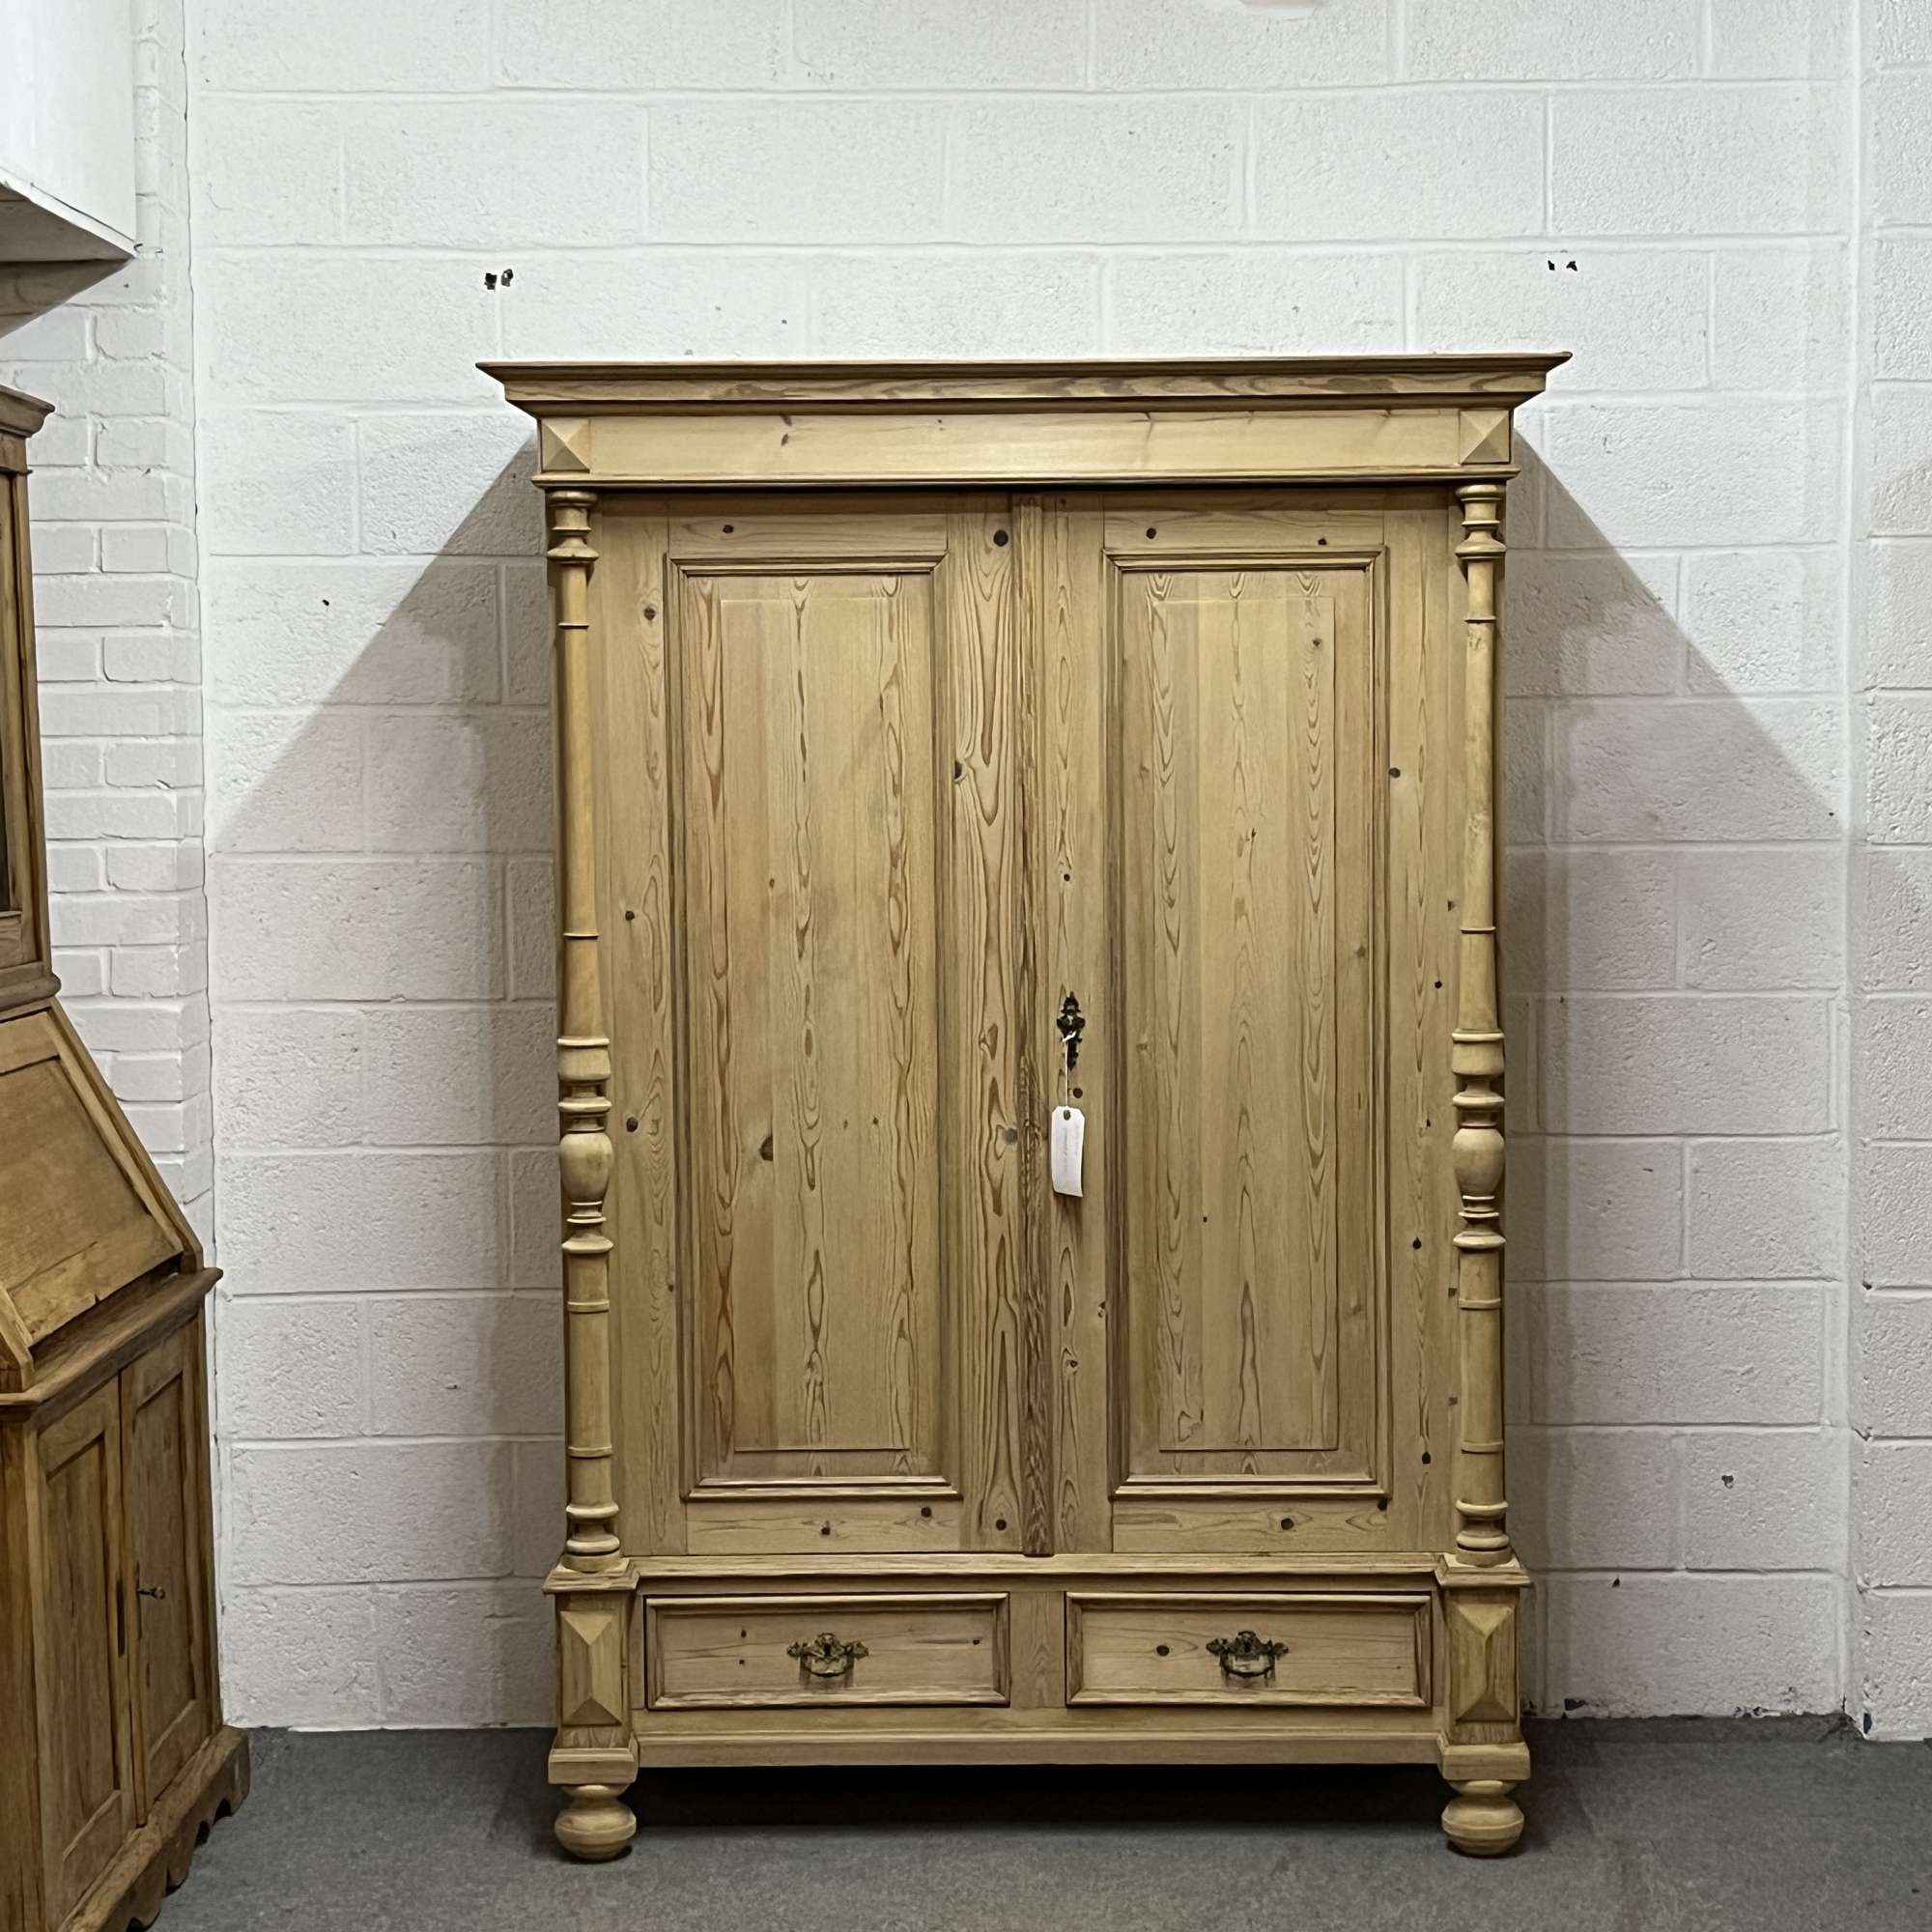 Beautiful Double Column Antique Pine Wardrobe With Bottom Drawers (dismantles)